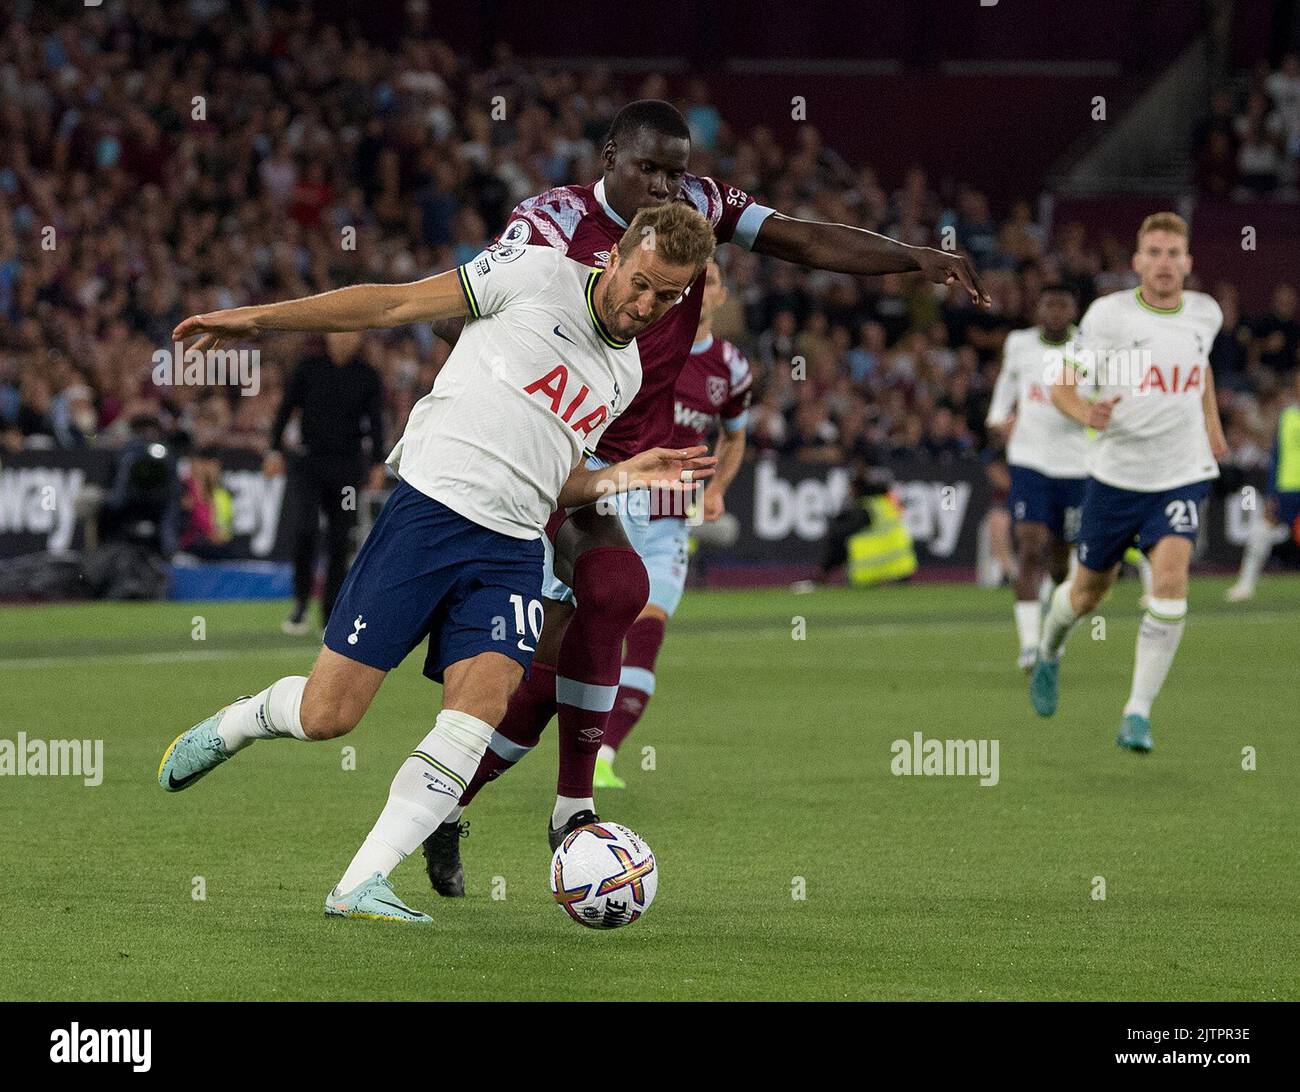 London, UK. 31st Aug, 2022. Harry Kane of Tottenham Hotspur in action with Kurt Zouma of West Ham Utd during the Premier League match, West Ham Utd v Tottenham Hotspur at the London Stadium, Queen Elizabeth Olympic Park in London on Wednesday 31st August 2022. this image may only be used for Editorial purposes. Editorial use only pic by Sandra Mailer/Andrew Orchard sports photography/Alamy Live news Credit: Andrew Orchard sports photography/Alamy Live News Stock Photo